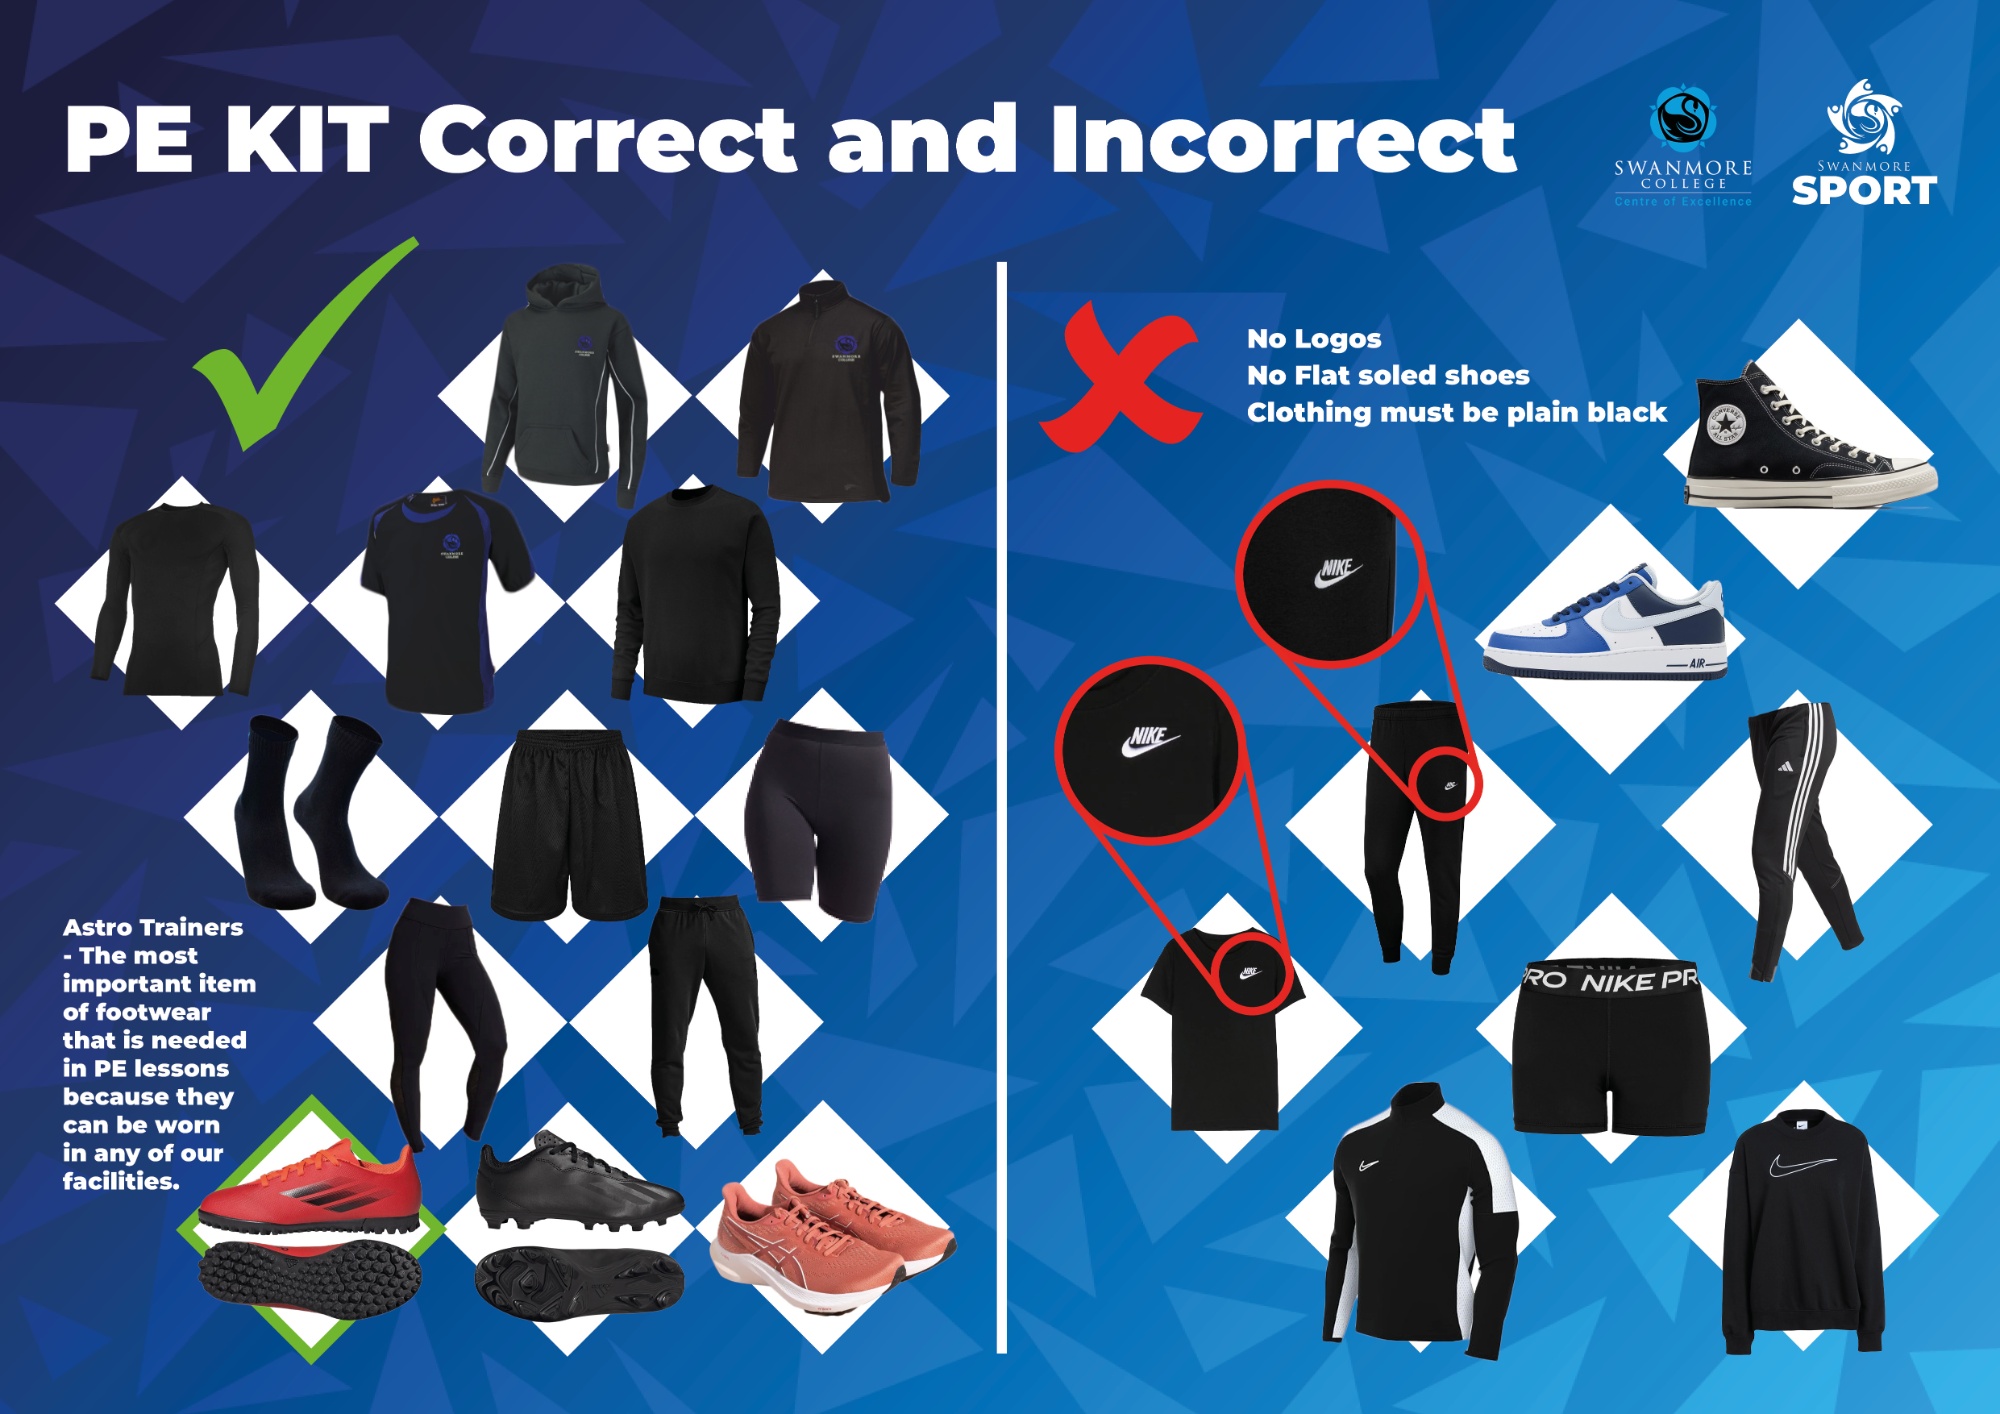 Image shows correct items of black PE kit for Swanmore College, and incorrect items, including flat-soled sports shoes, clothing with logos and any other designs like stripes